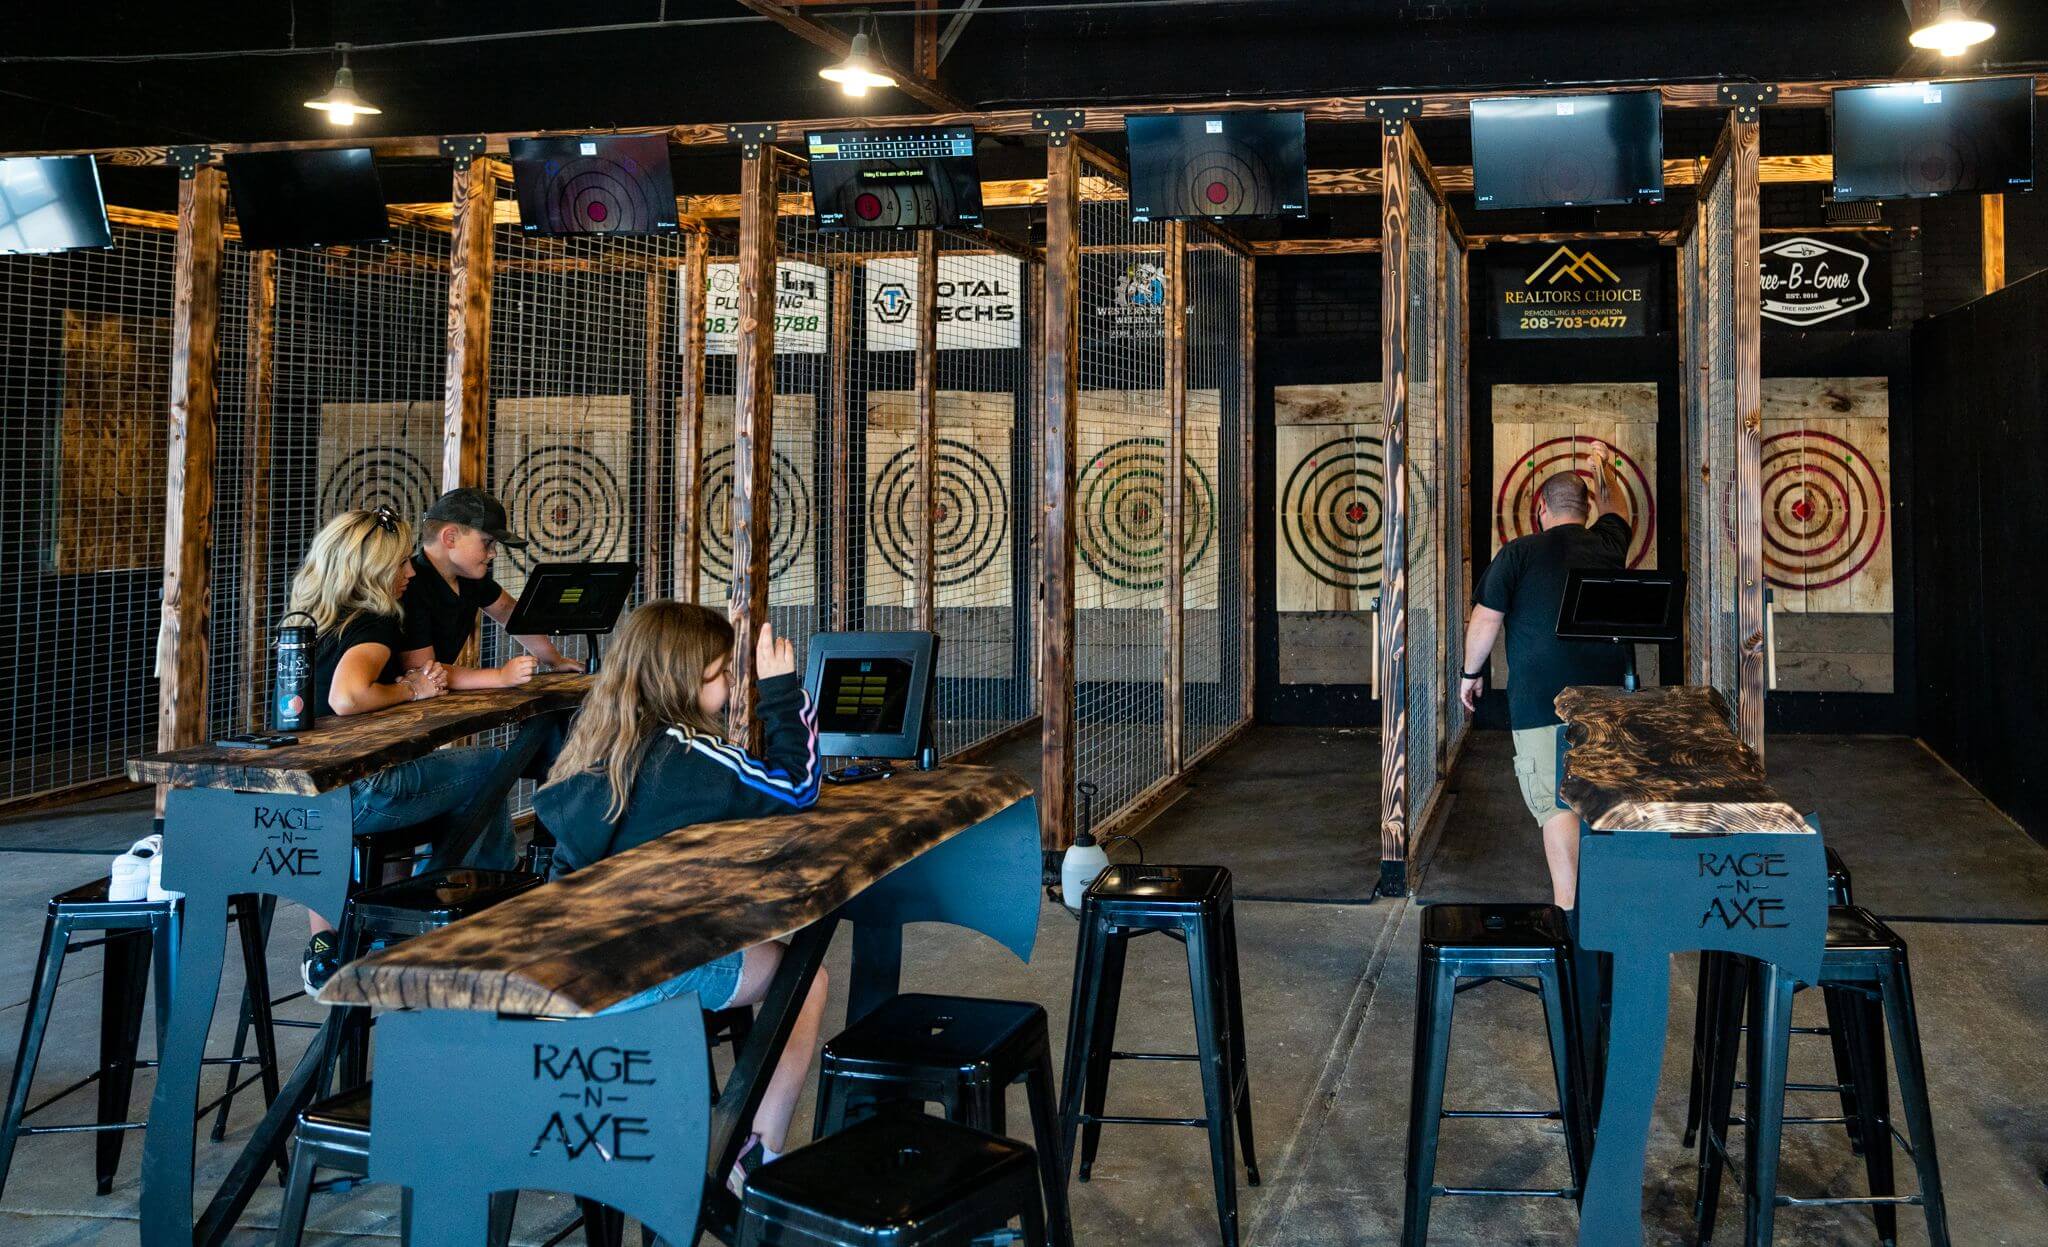 Two parties of two people each enjoying the Twin Blades Axe Throwing facilities.